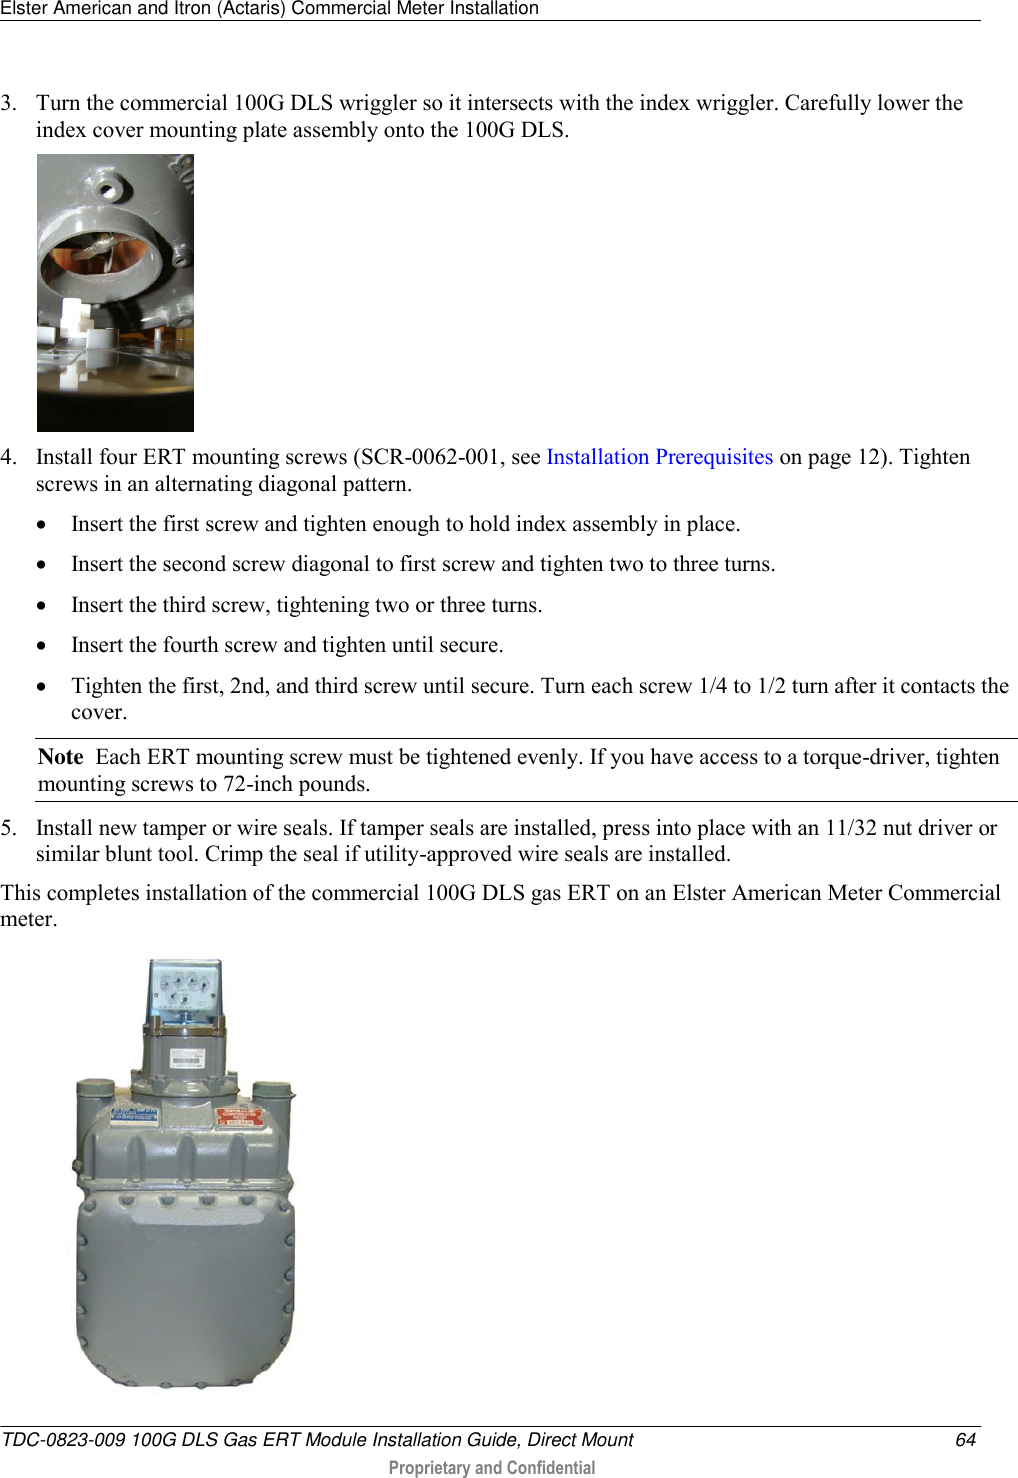 Elster American and Itron (Actaris) Commercial Meter Installation   TDC-0823-009 100G DLS Gas ERT Module Installation Guide, Direct Mount  64  Proprietary and Confidential    3. Turn the commercial 100G DLS wriggler so it intersects with the index wriggler. Carefully lower the index cover mounting plate assembly onto the 100G DLS.     4. Install four ERT mounting screws (SCR-0062-001, see Installation Prerequisites on page 12). Tighten screws in an alternating diagonal pattern.   Insert the first screw and tighten enough to hold index assembly in place.   Insert the second screw diagonal to first screw and tighten two to three turns.   Insert the third screw, tightening two or three turns.   Insert the fourth screw and tighten until secure.   Tighten the first, 2nd, and third screw until secure. Turn each screw 1/4 to 1/2 turn after it contacts the cover.  Note  Each ERT mounting screw must be tightened evenly. If you have access to a torque-driver, tighten mounting screws to 72-inch pounds. 5. Install new tamper or wire seals. If tamper seals are installed, press into place with an 11/32 nut driver or similar blunt tool. Crimp the seal if utility-approved wire seals are installed. This completes installation of the commercial 100G DLS gas ERT on an Elster American Meter Commercial meter.   